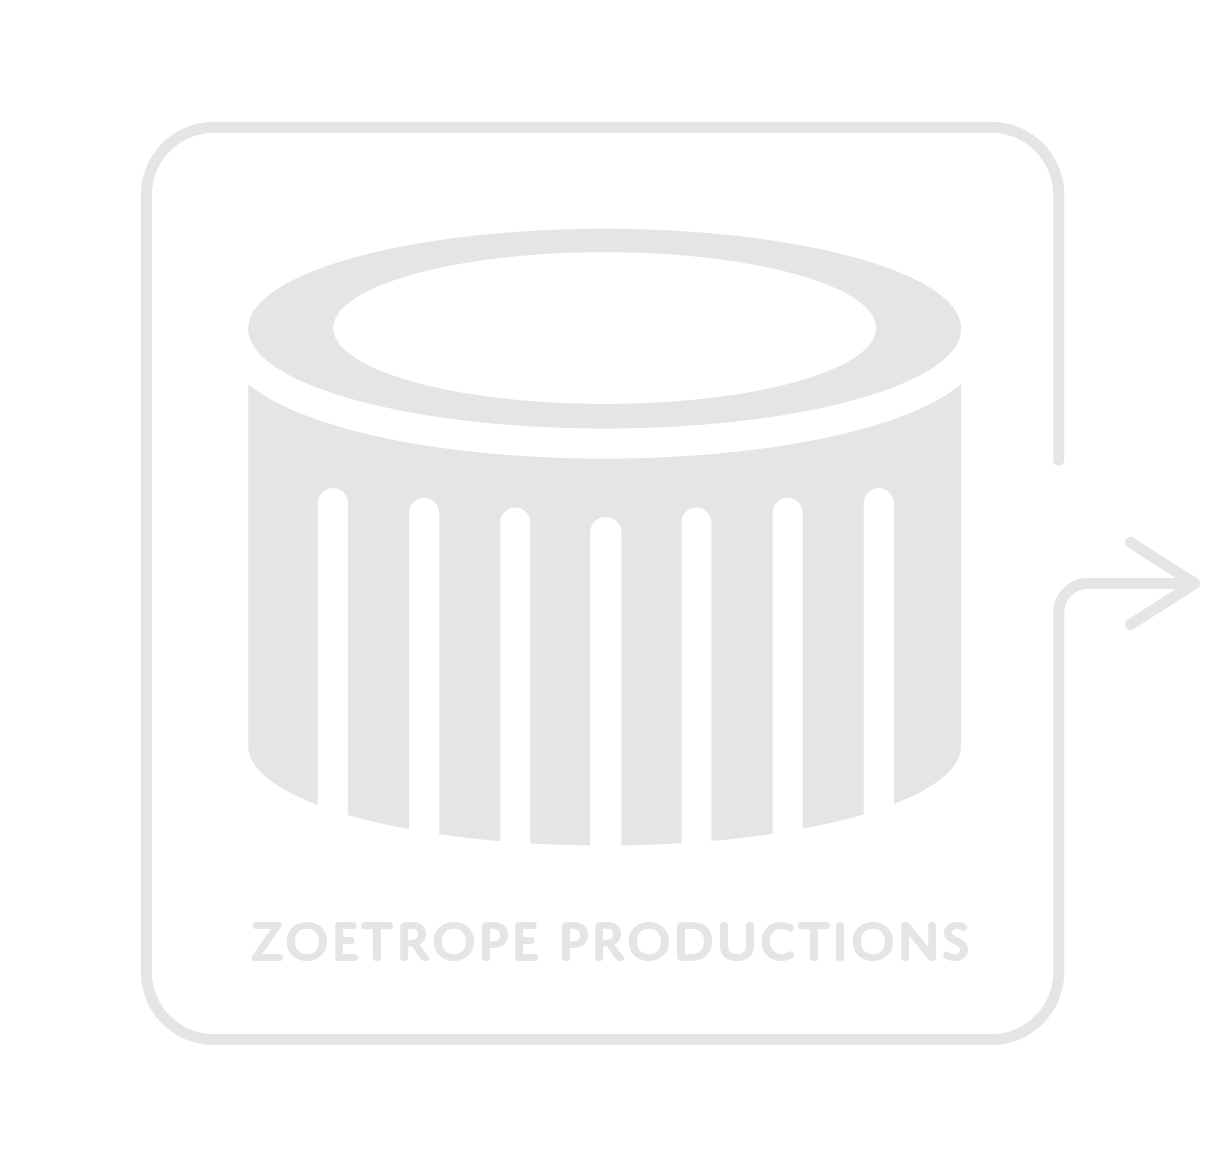 Zoetrope Productions